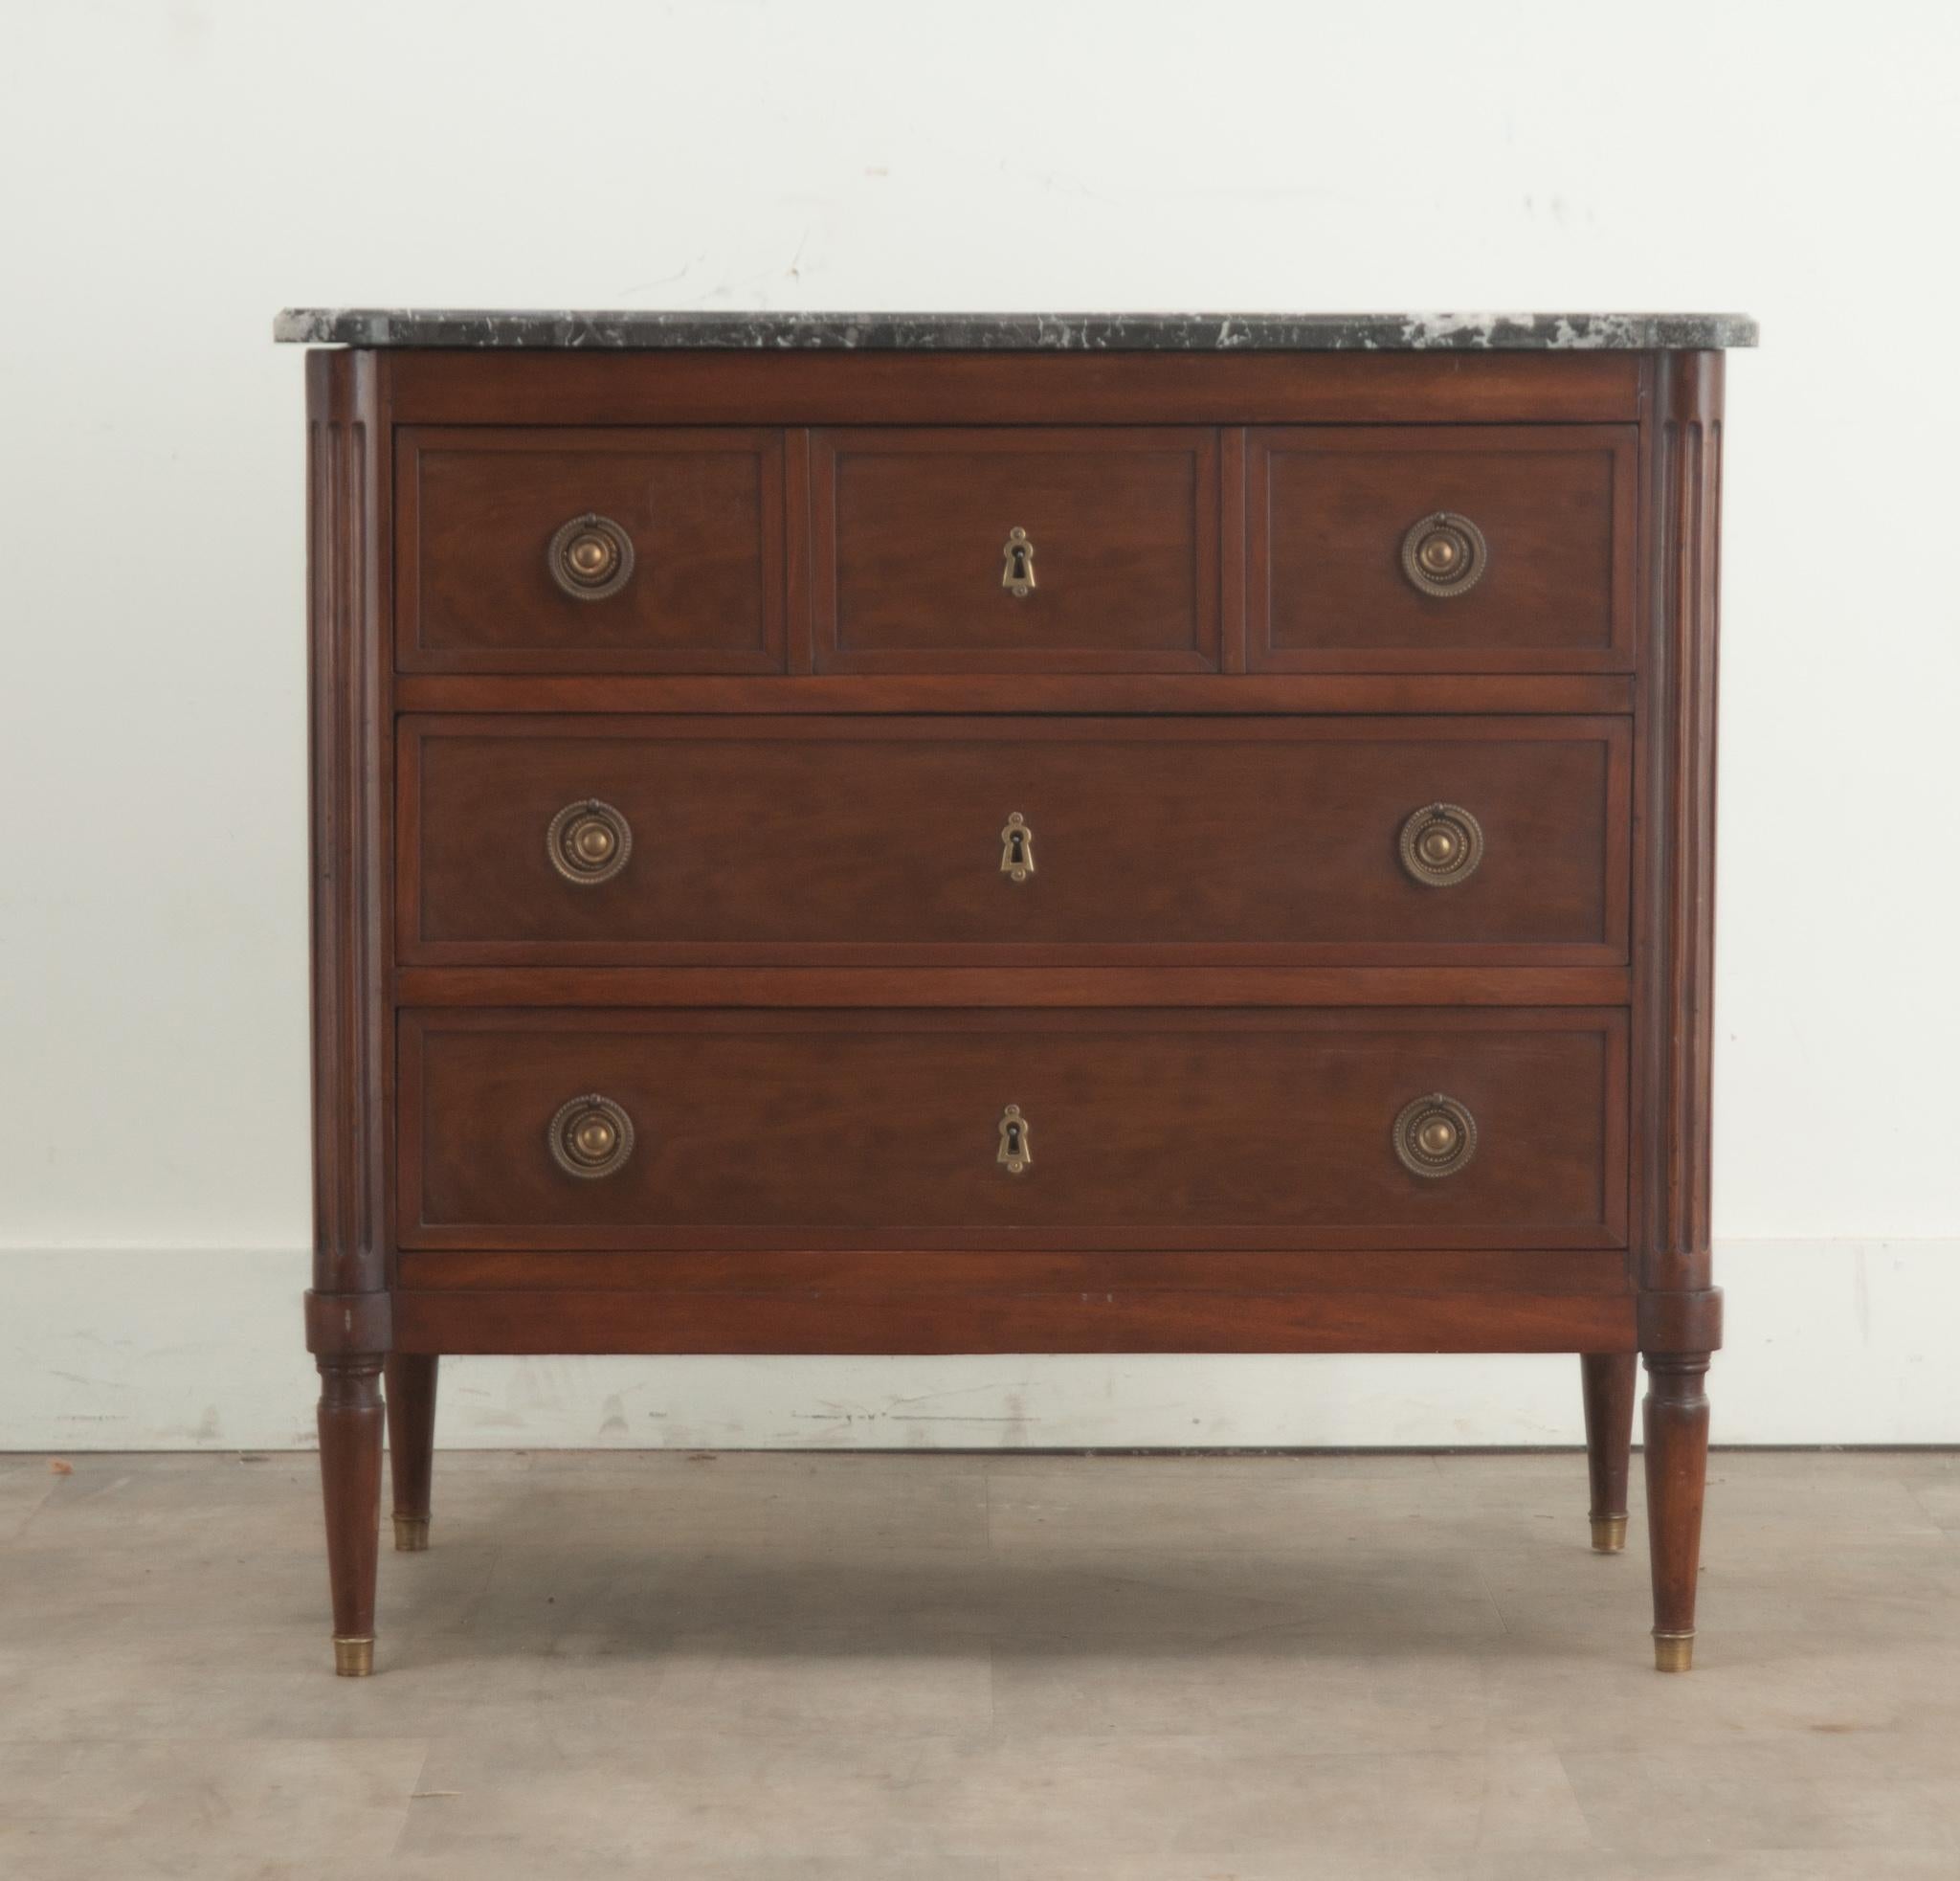 A petite French Louis XVI style mahogany and marble commode. The original, shaped St. Anne’s marble top has been professionally repaired and makes for a gorgeous and durable surface. Three vertically stacked drawers are easy to use with brass pulls